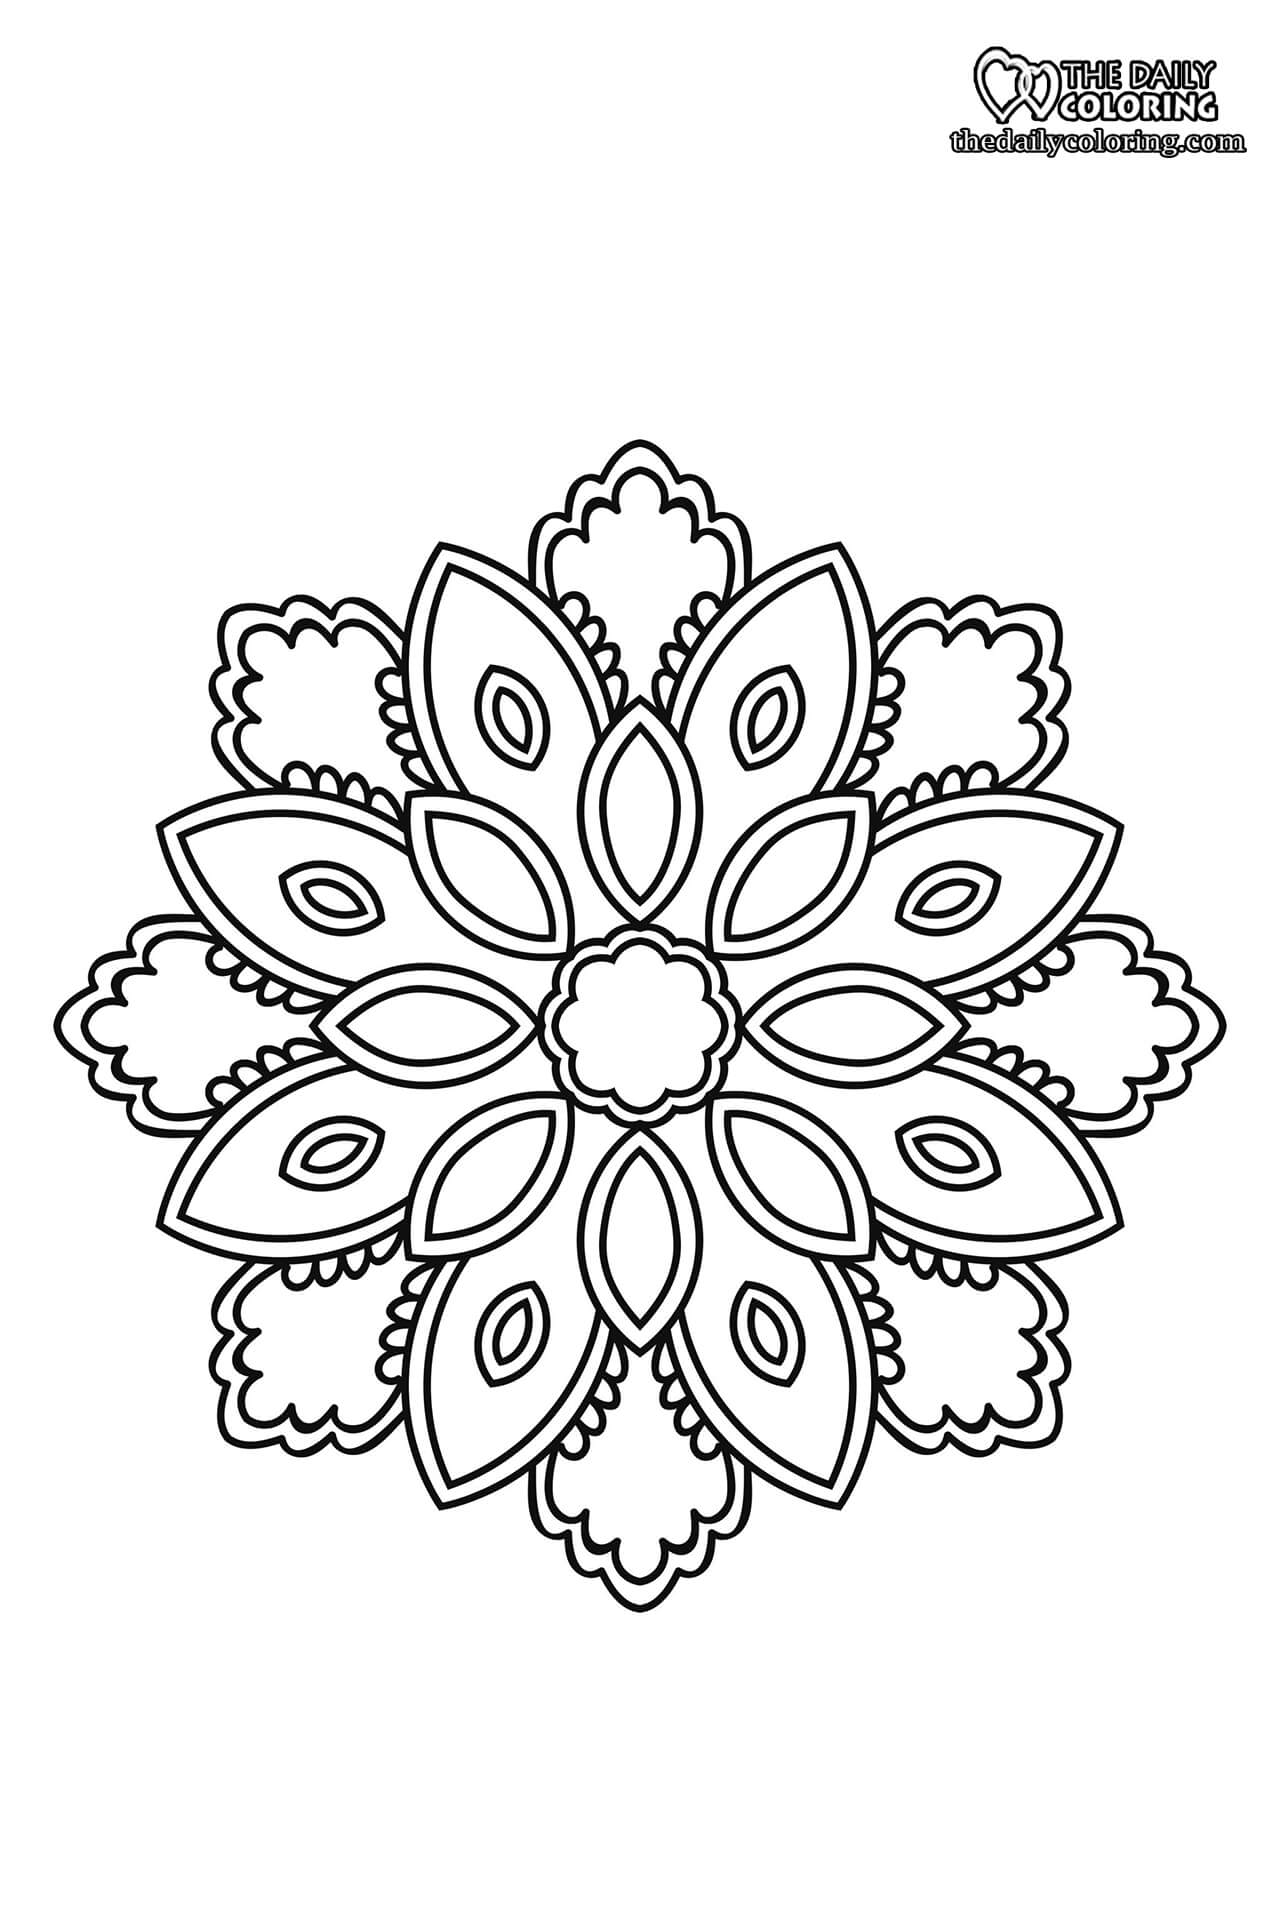 Mandala Flower Coloring Pages   The Daily Coloring